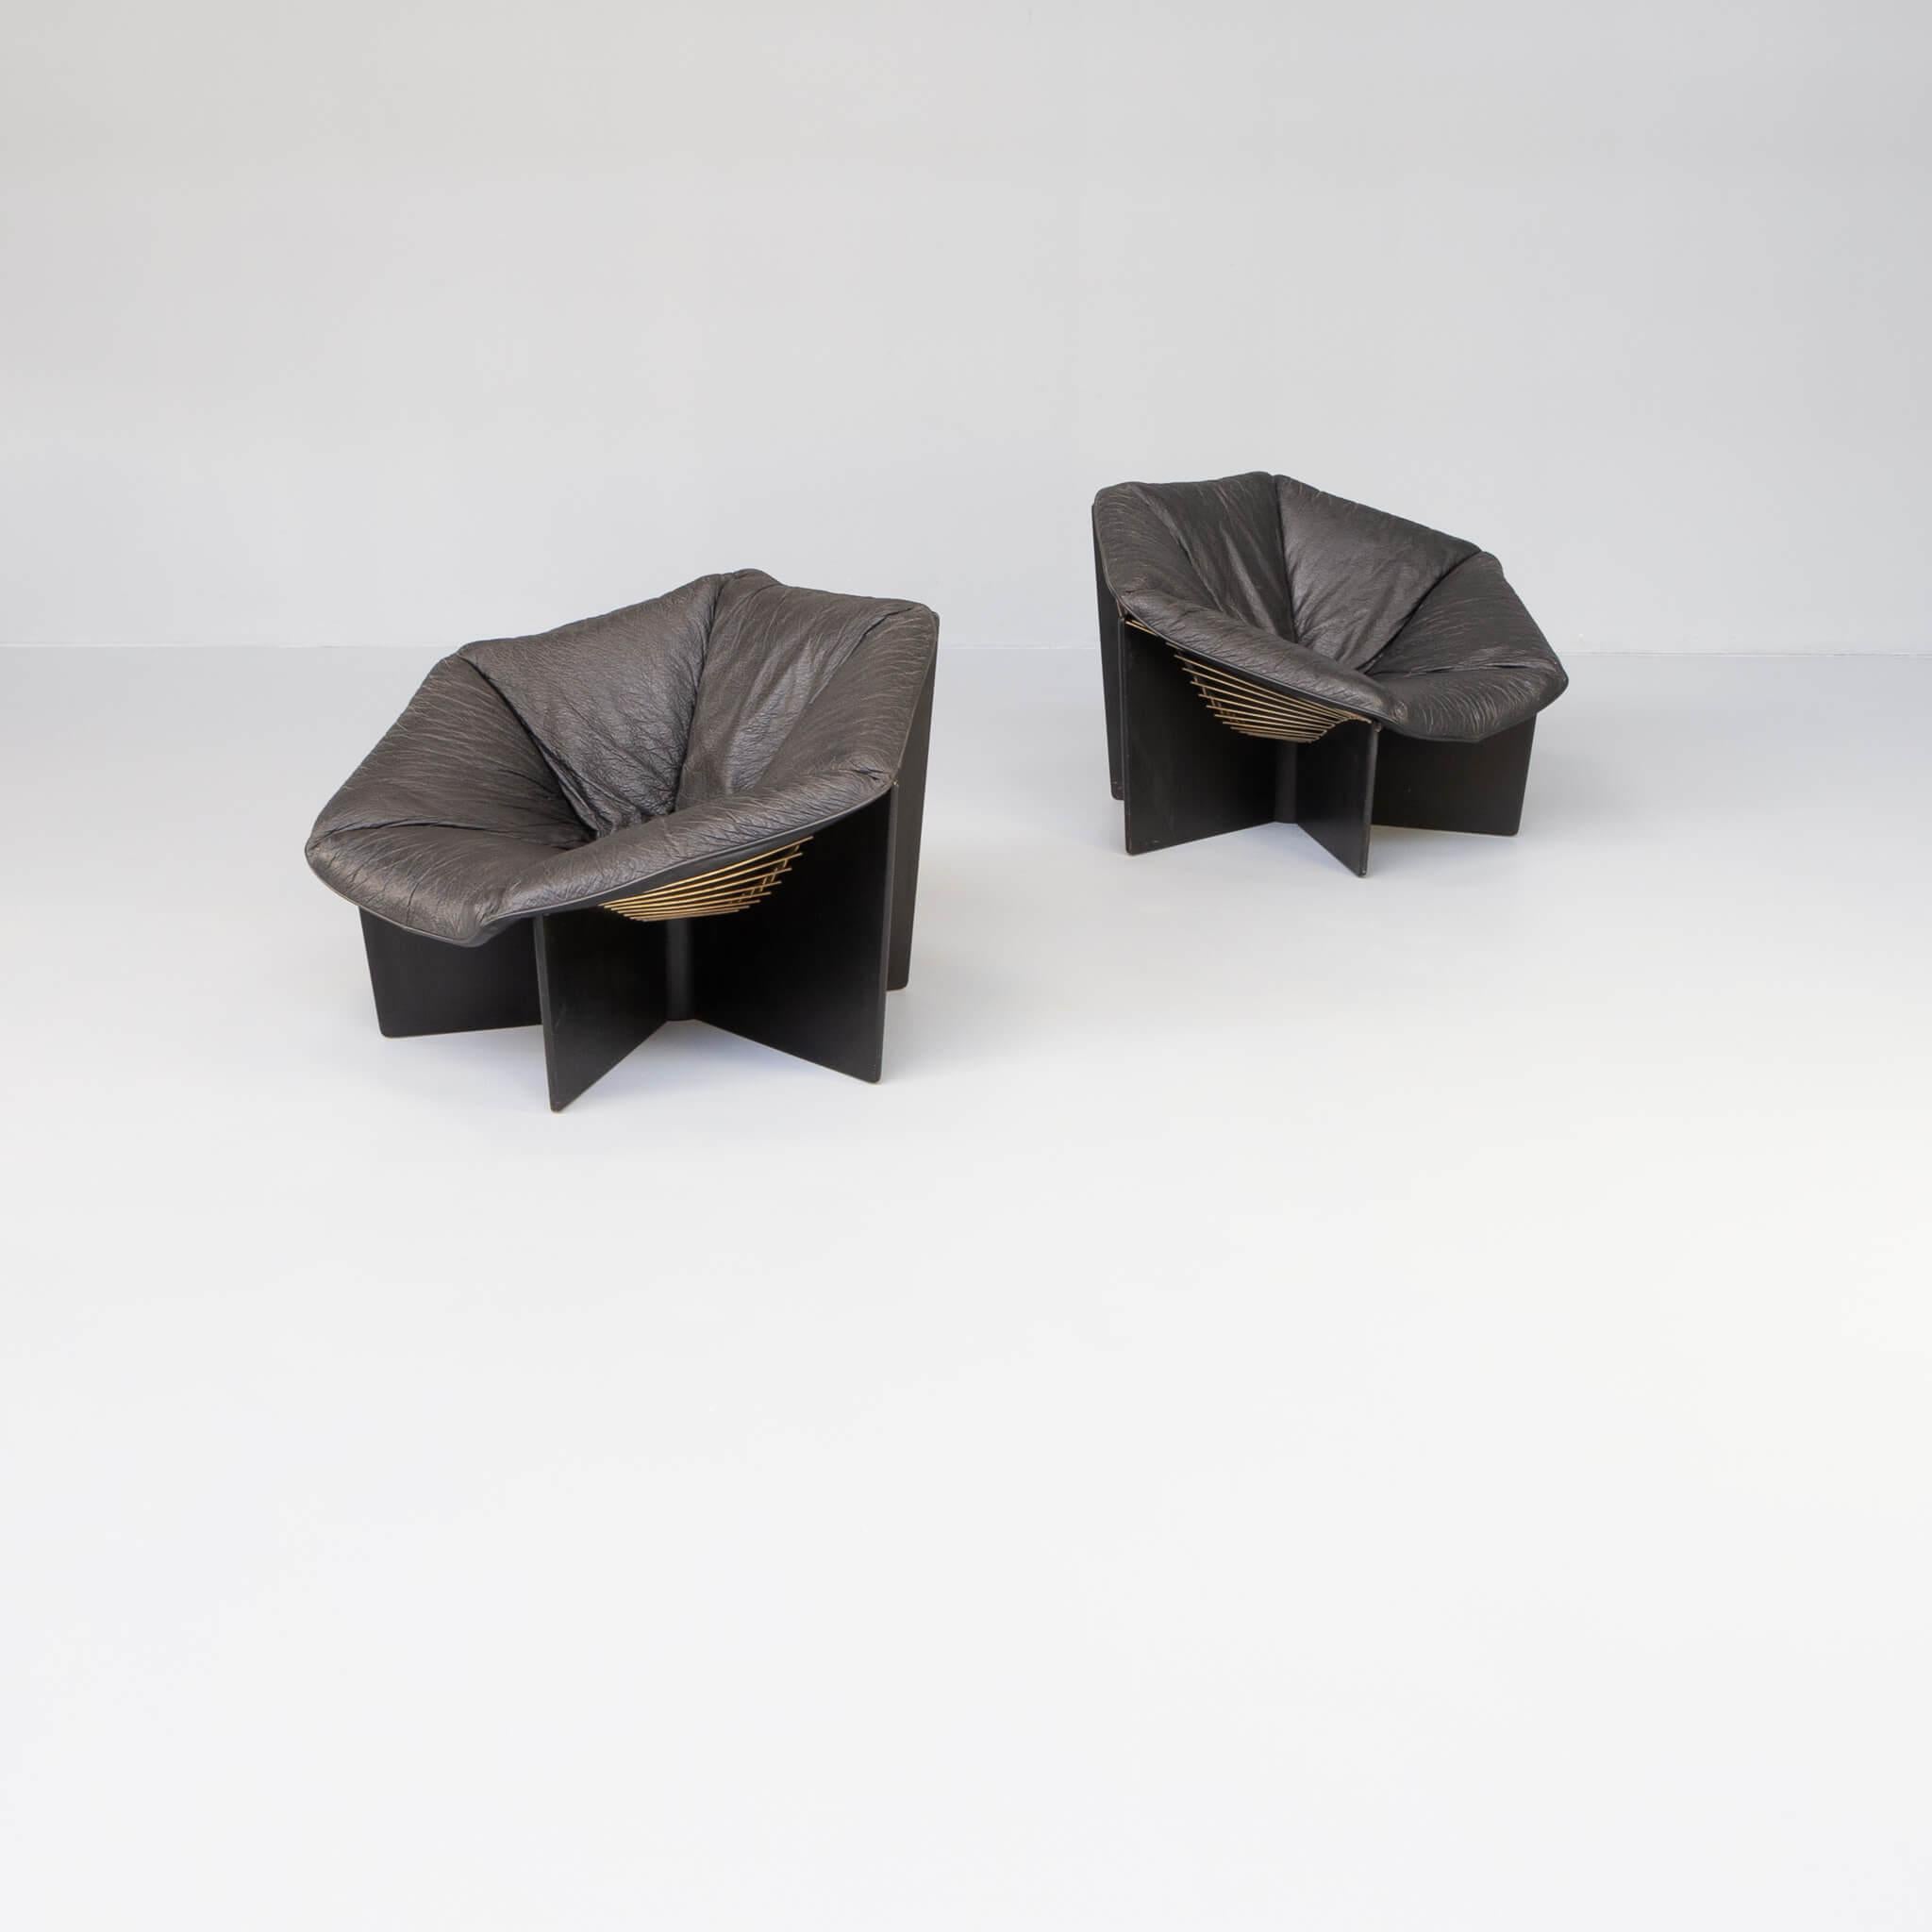 Pierre Paulin designed te important lounge chair model F678 for Artifort in 1965. Together with this epic fauteuil he designed the T878 coffee table. Also called Spider. This is timeless design on the highest level. This original set of two